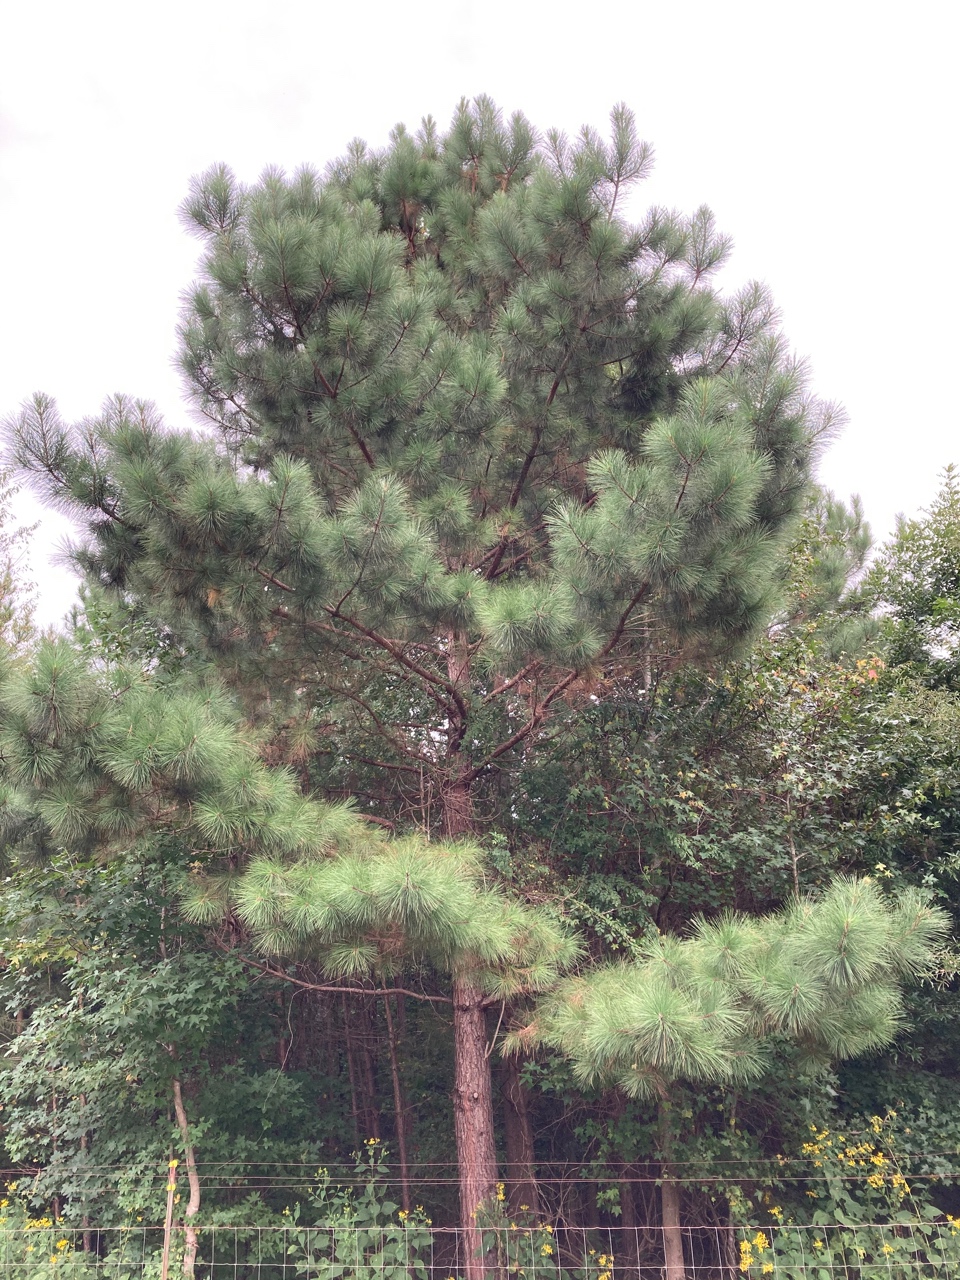 The Scientific Name is Pinus taeda. You will likely hear them called Loblolly Pine, Old Field Pine. This picture shows the ~10-15 yr old tree of Pinus taeda